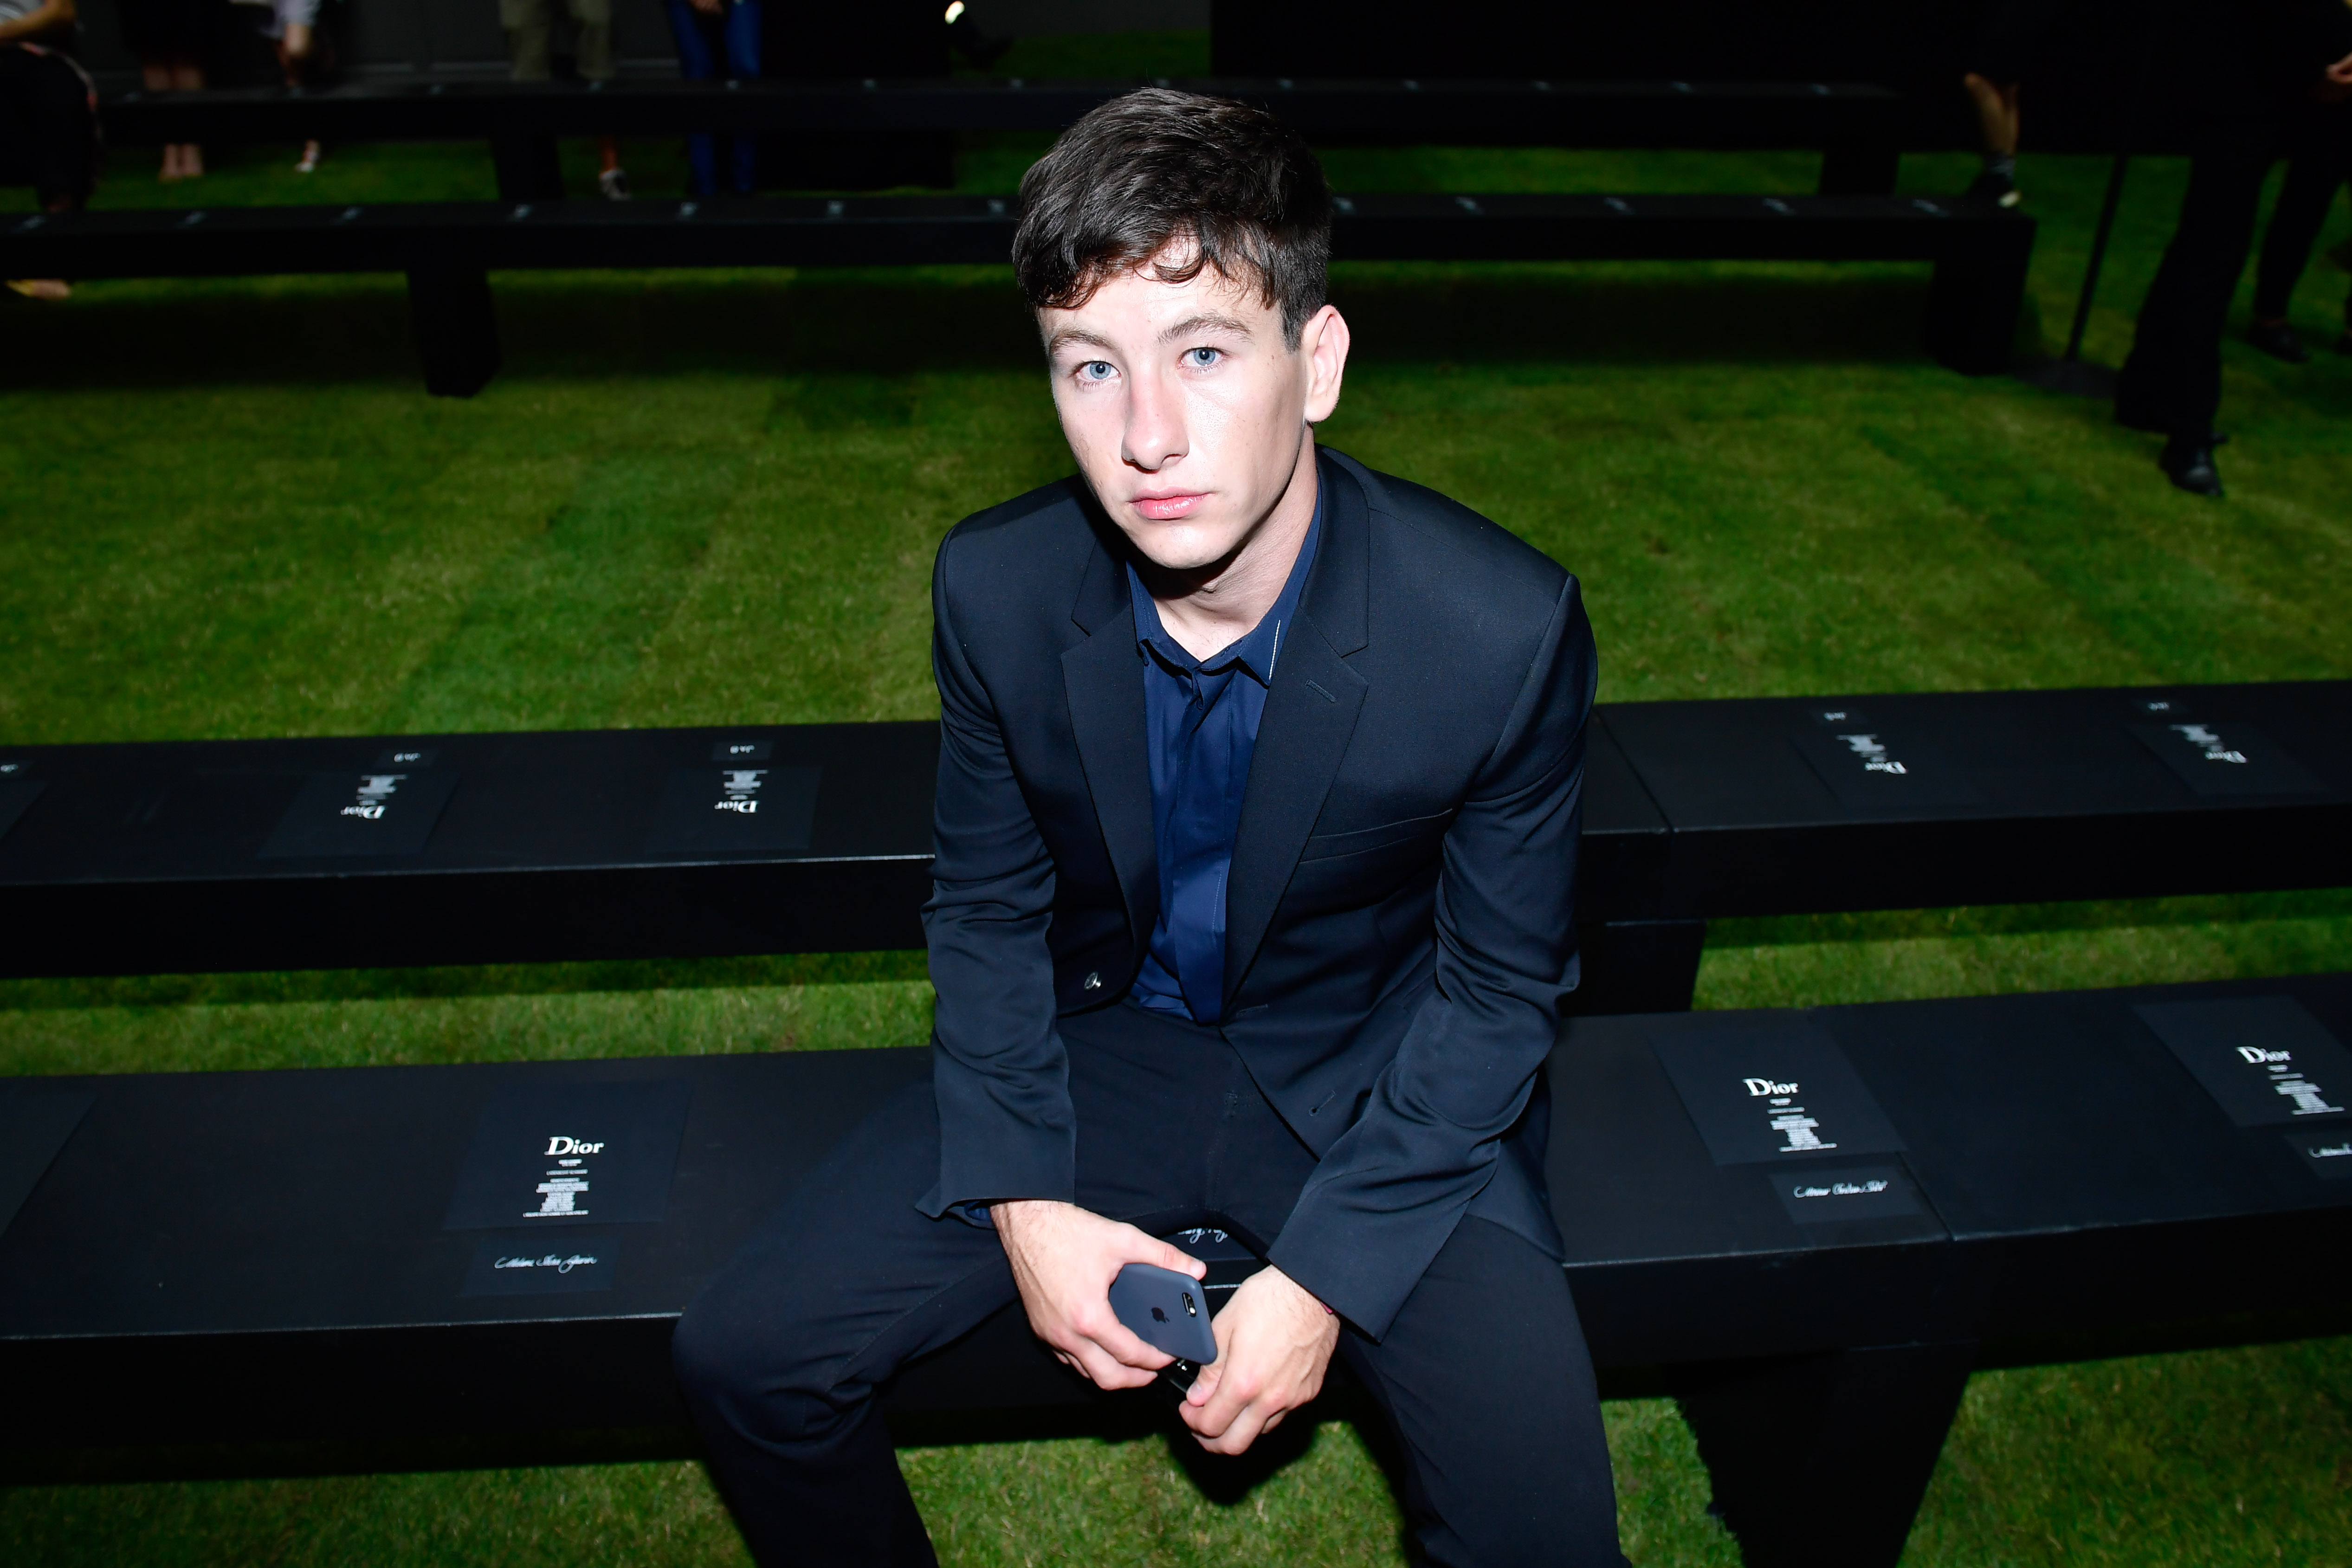 Barry Keoghan attends the Dior Homme Menswear Spring/Summer 2018 show during the Paris Fashion Week on June 24, 2017 in Paris, France | Source: Getty Images